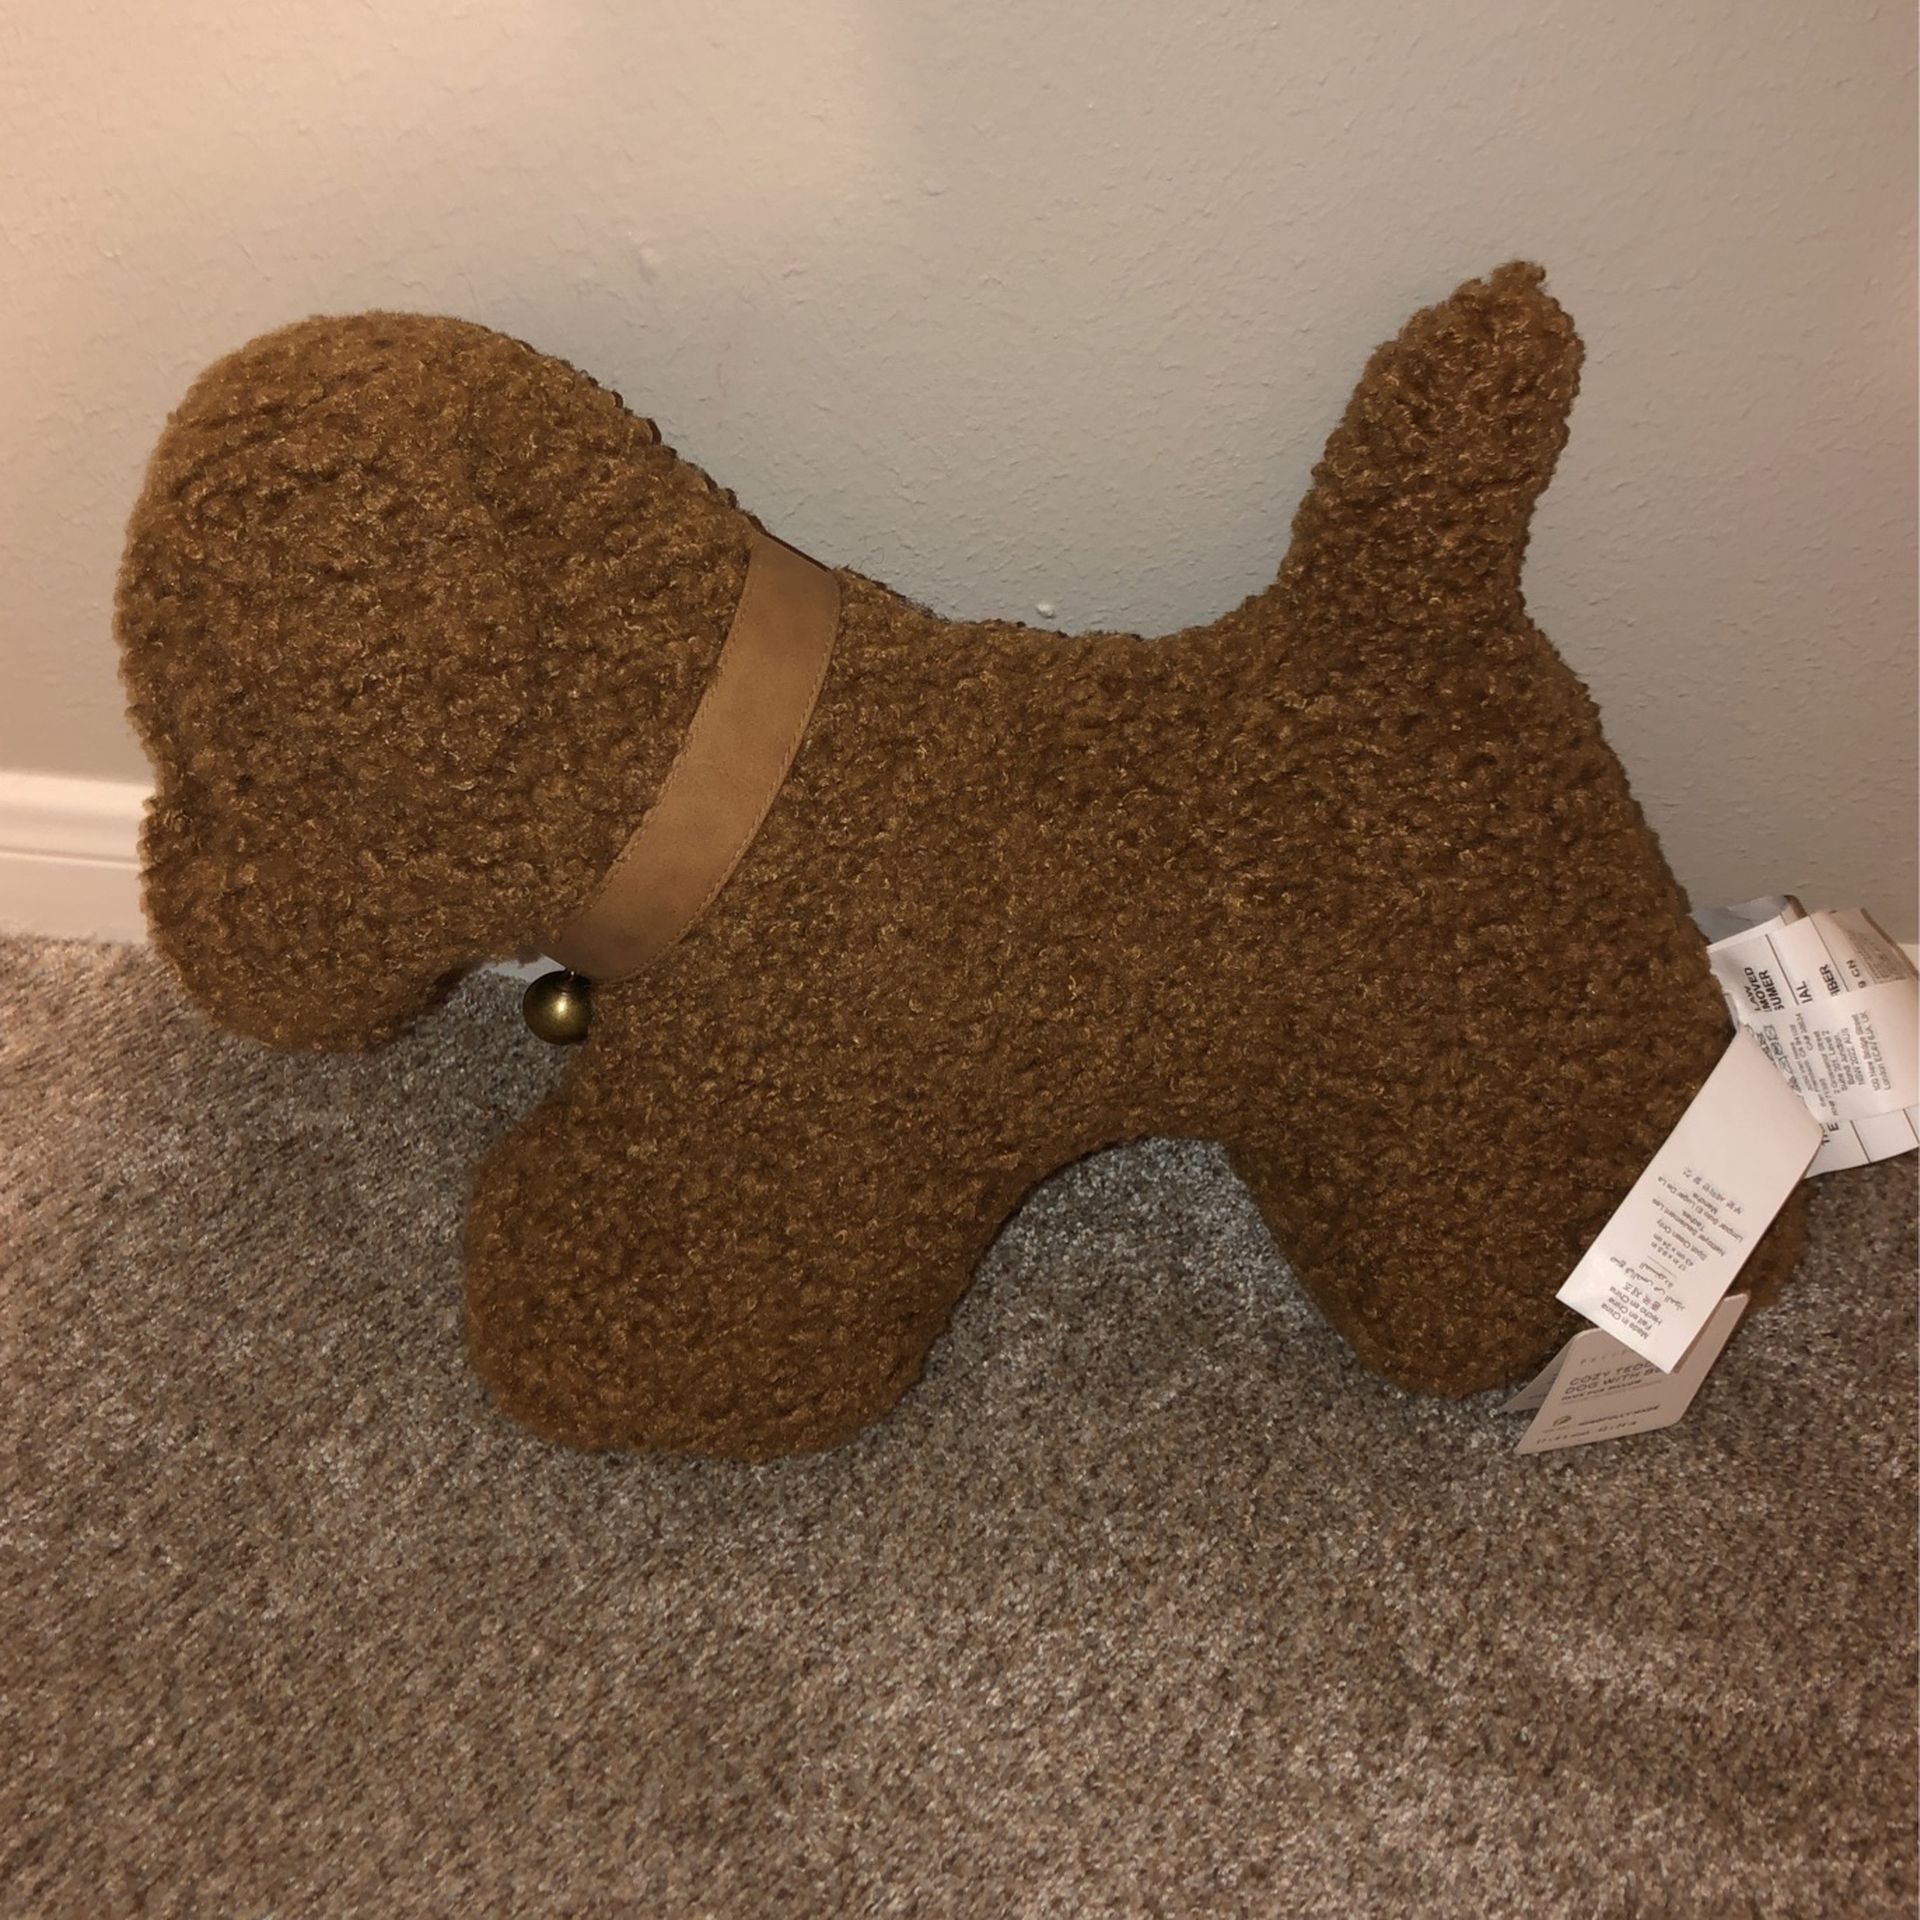 SOLD OUT Pottery Barn Tobacco(brown) Dog Pillow